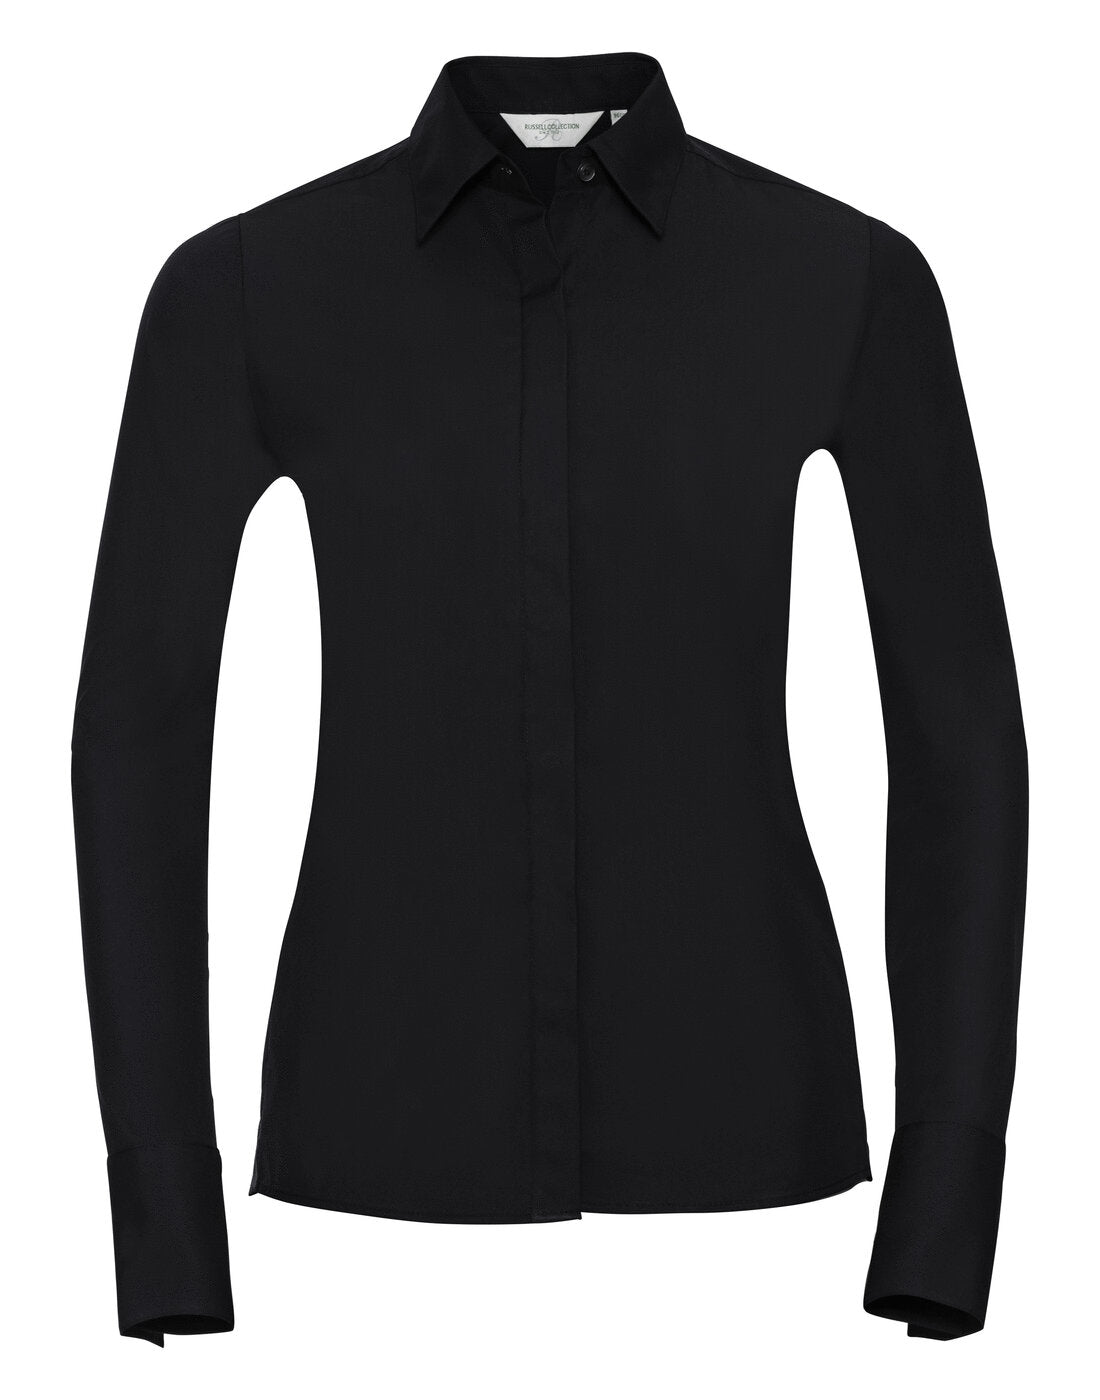 Russell Ladies Long Sleeve Ultimate Stretch Shirt Black